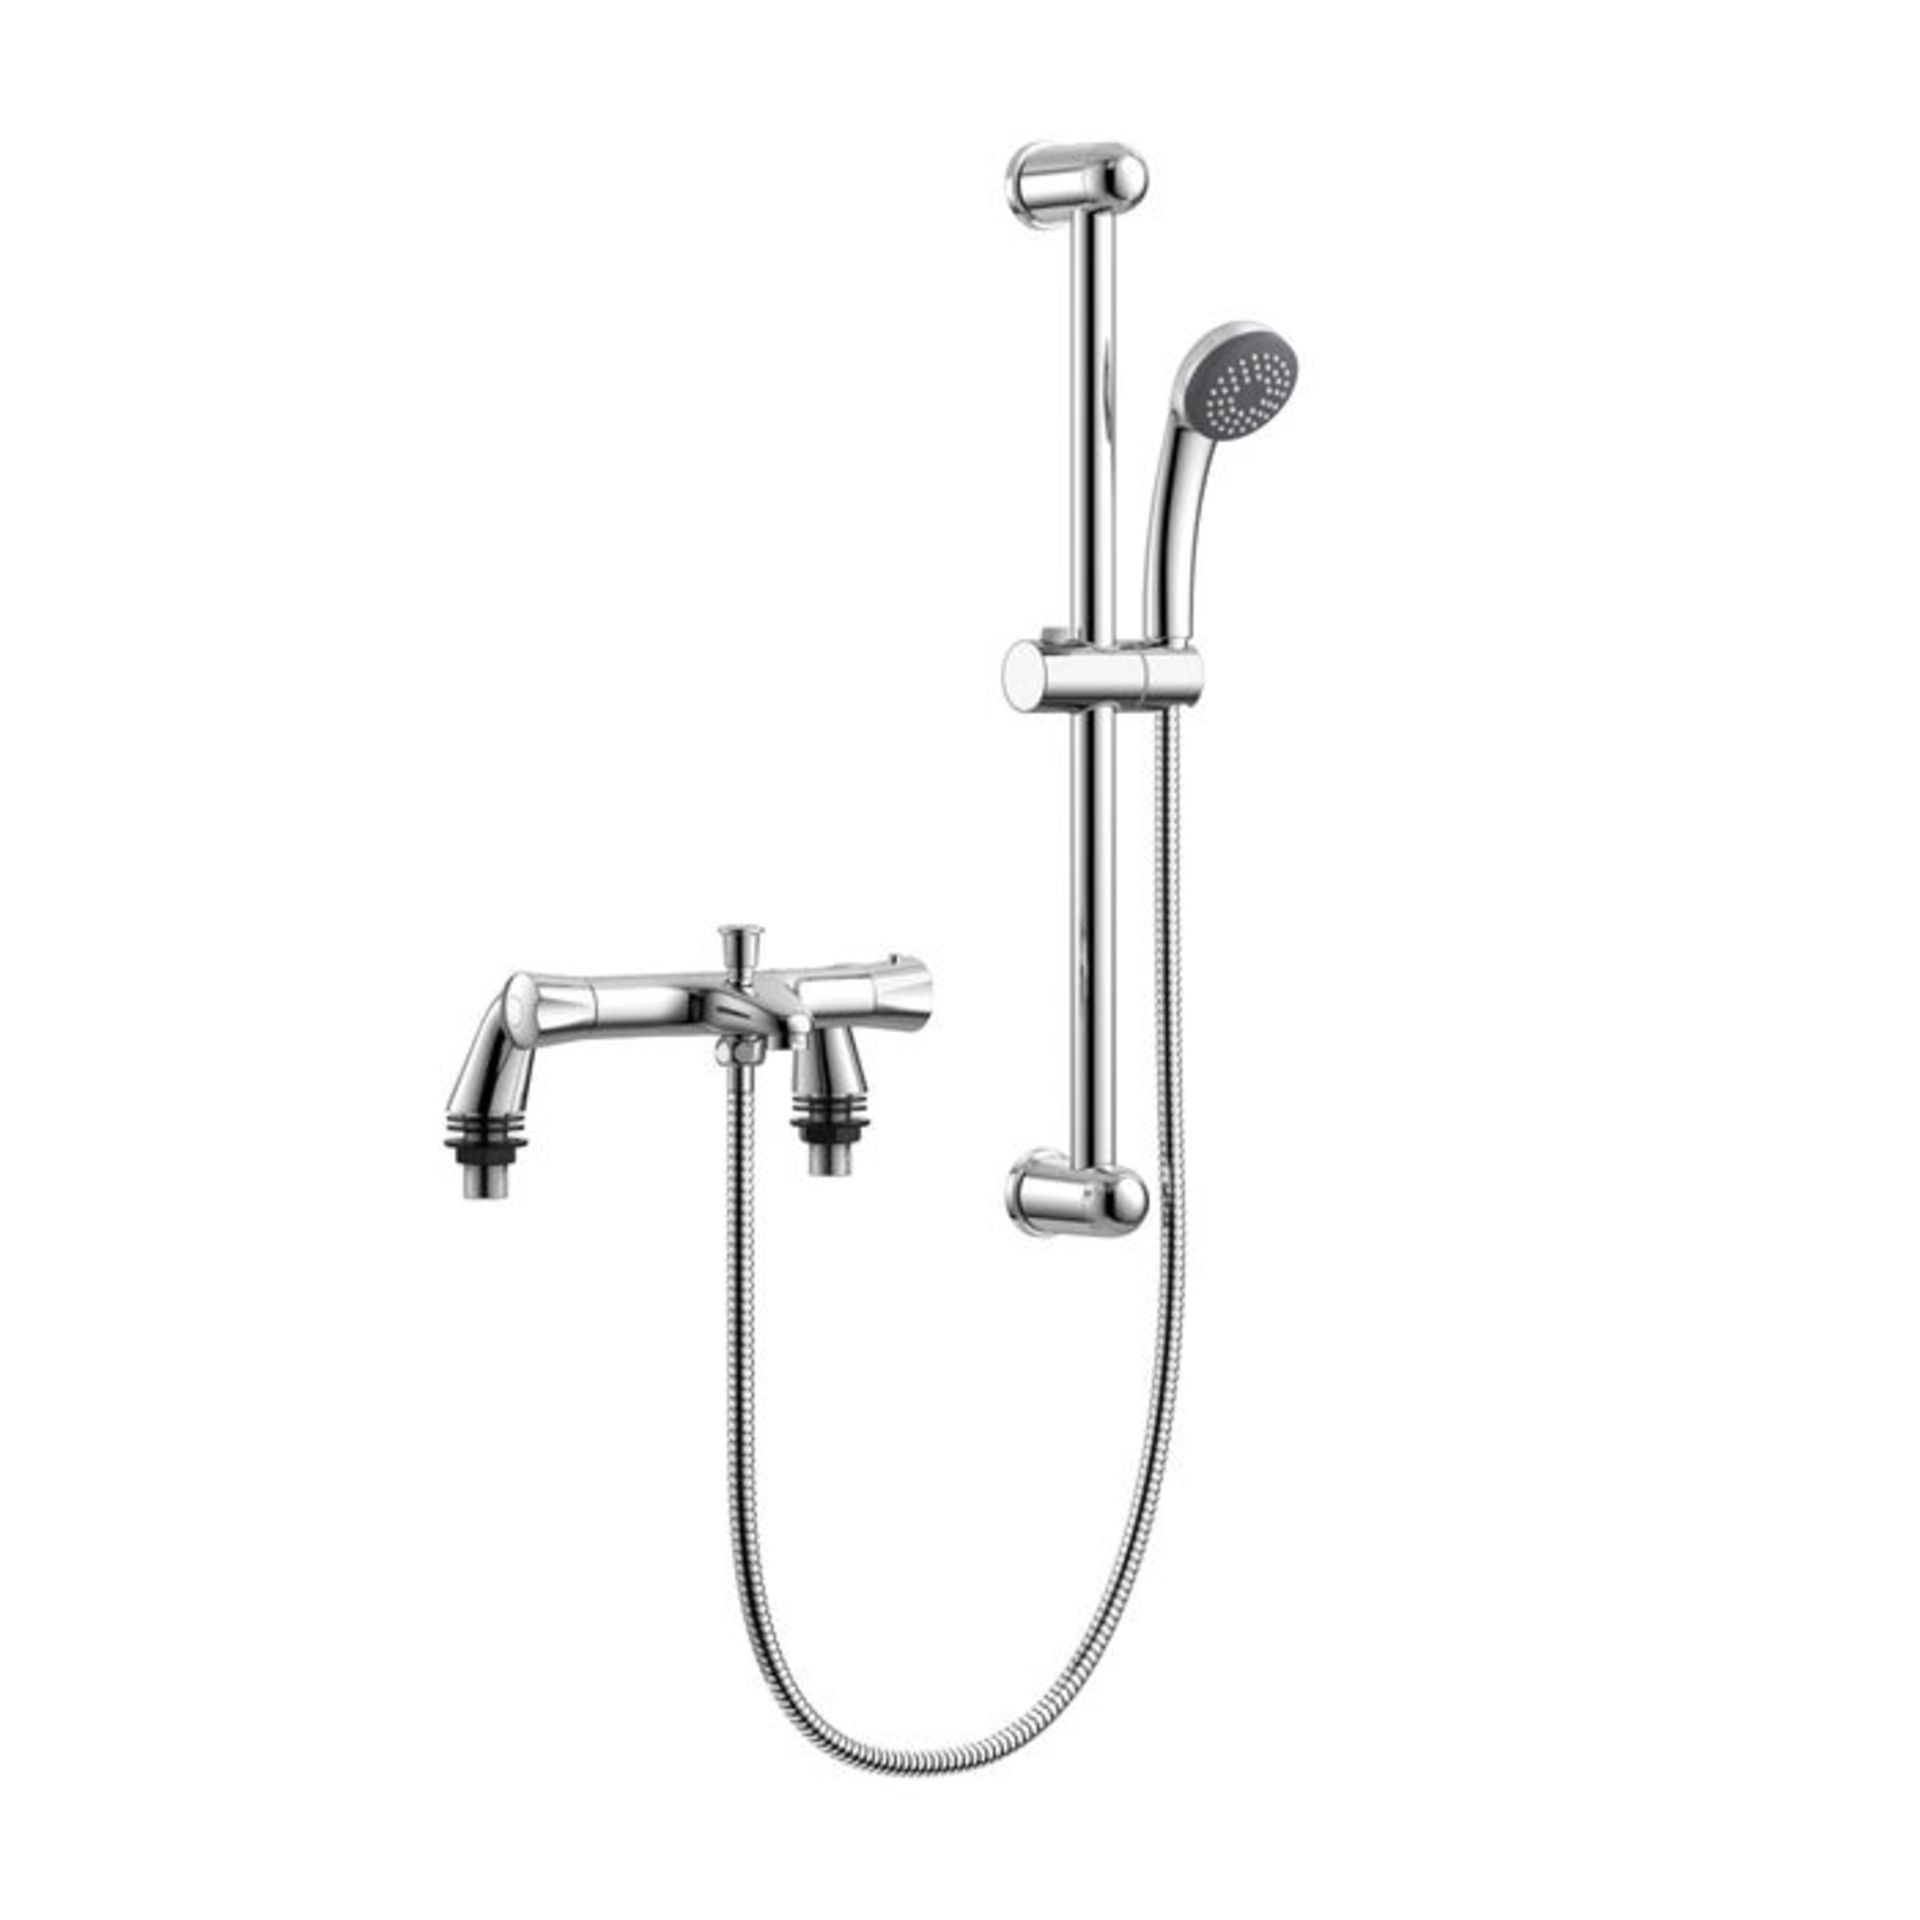 (CT198) Round Thermostatic Bar Mixer & Bath Filler. It has a detachable hand set to suit your needs